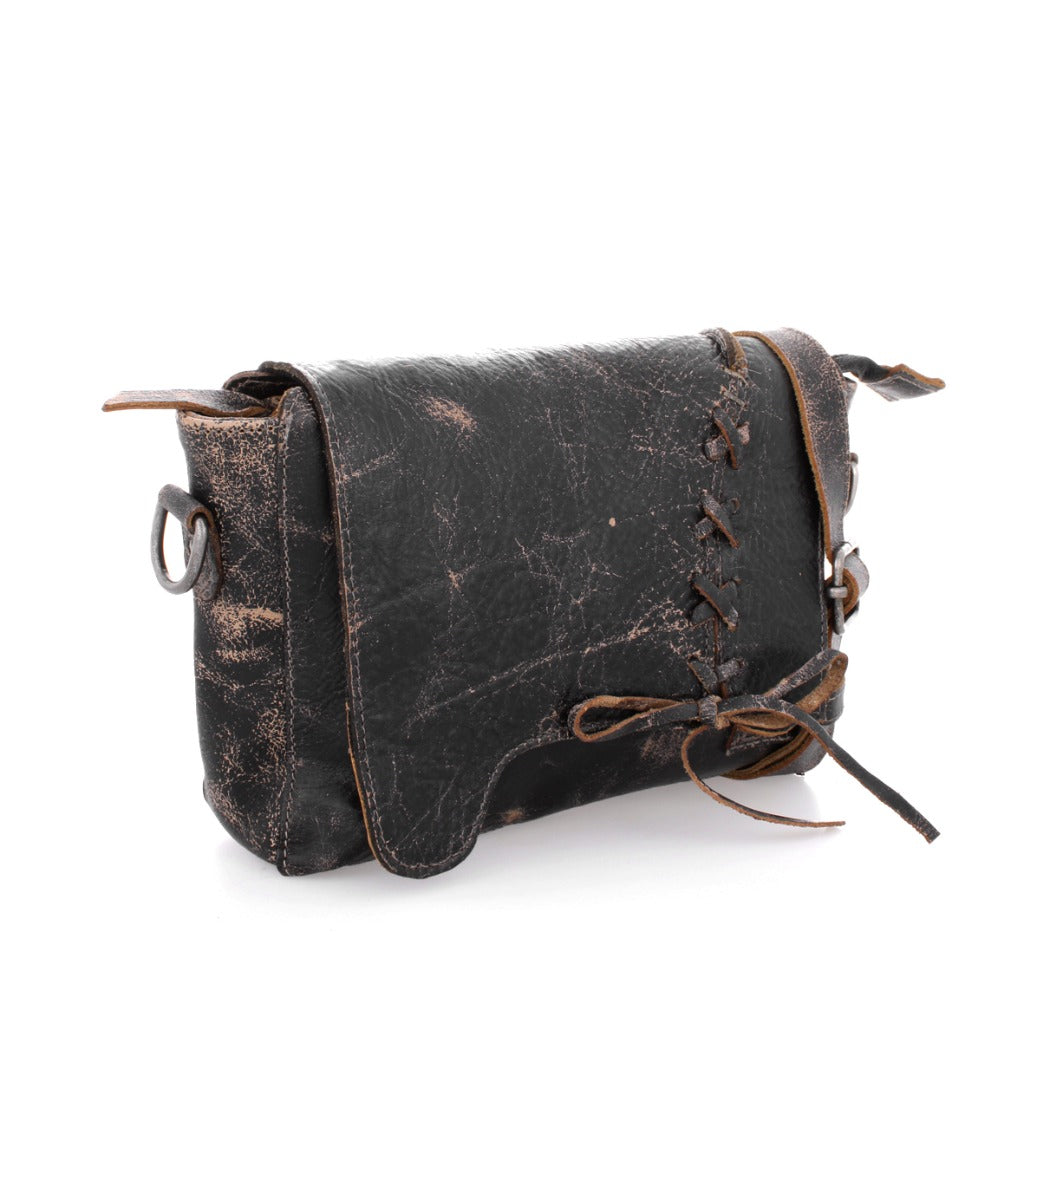 A black leather Buffy cross body bag with a Bed Stu leather strap.